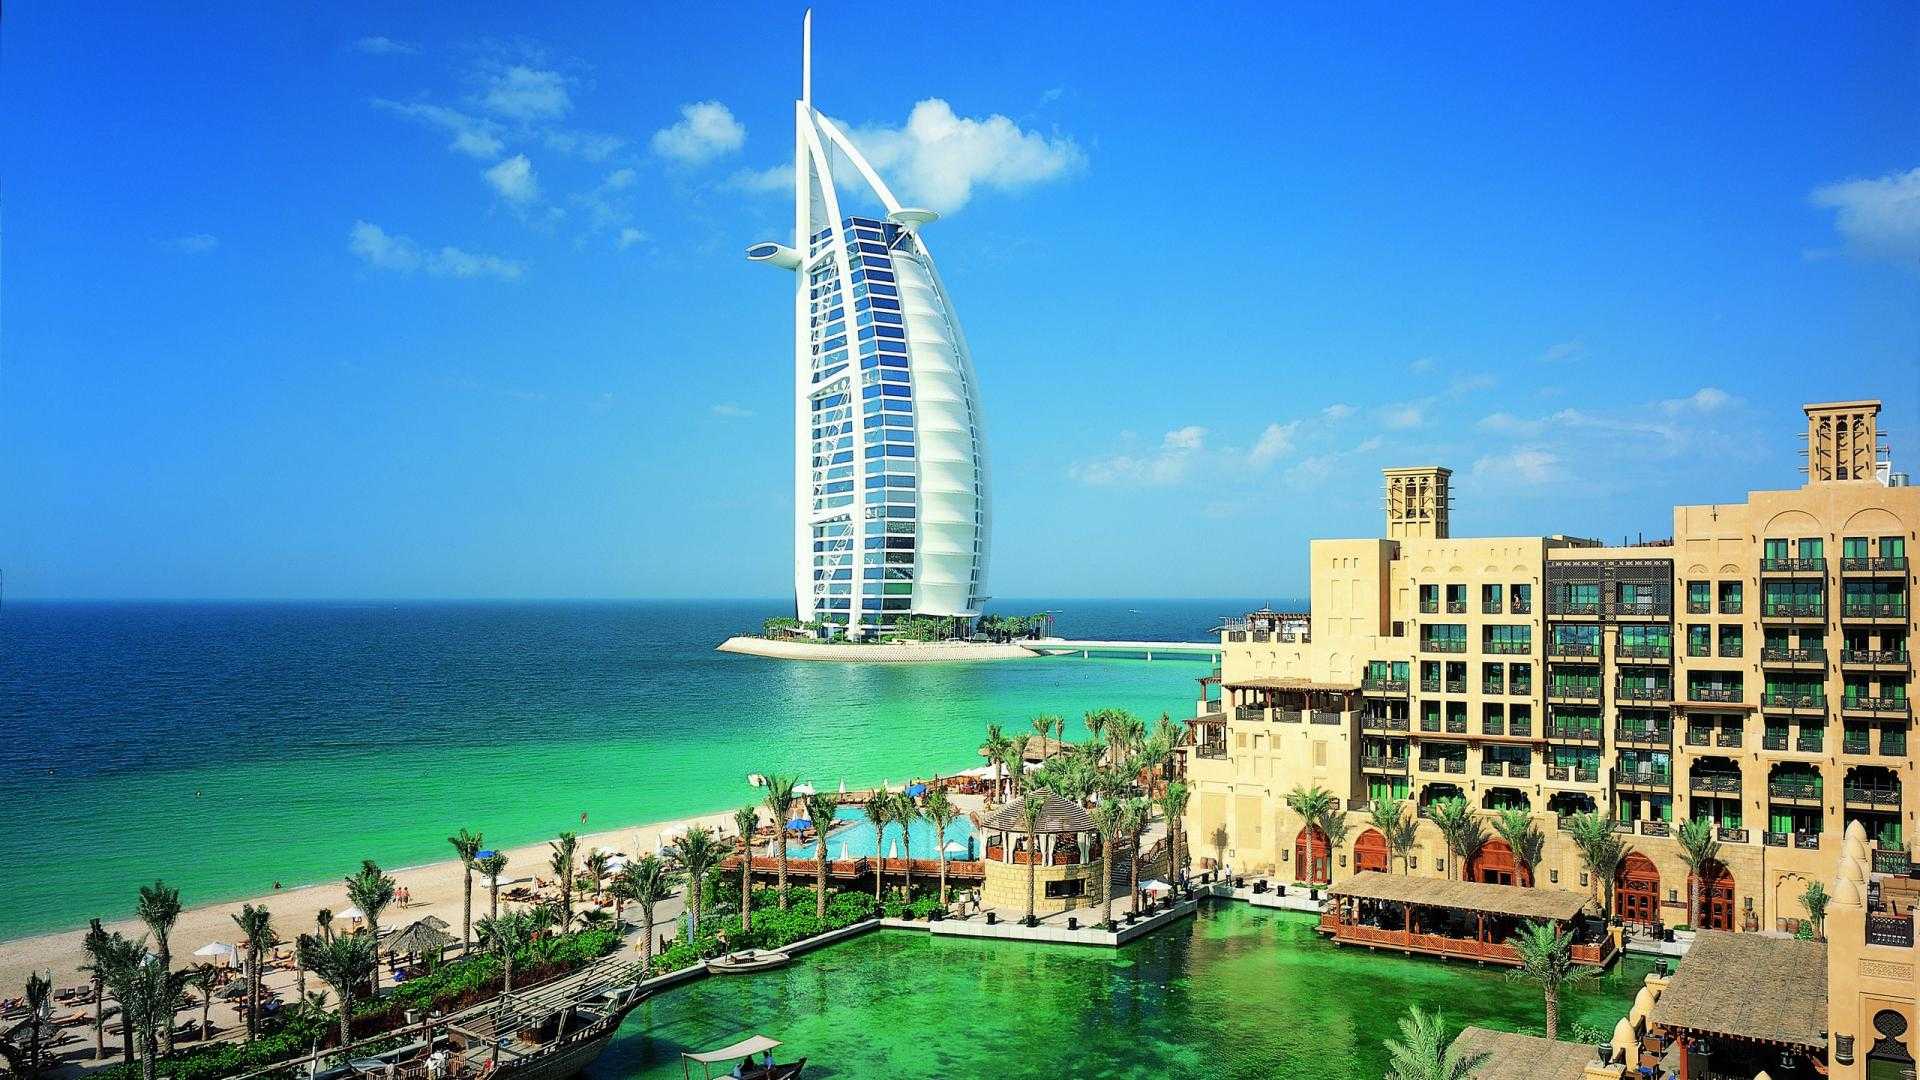 4 nights 5 days United Arab Emirates Honeymoon Tour Package with Experience IMG Worlds of Adventure: Lost Valley + Marvel Comics + Cartoon Network + IMG Boulevard